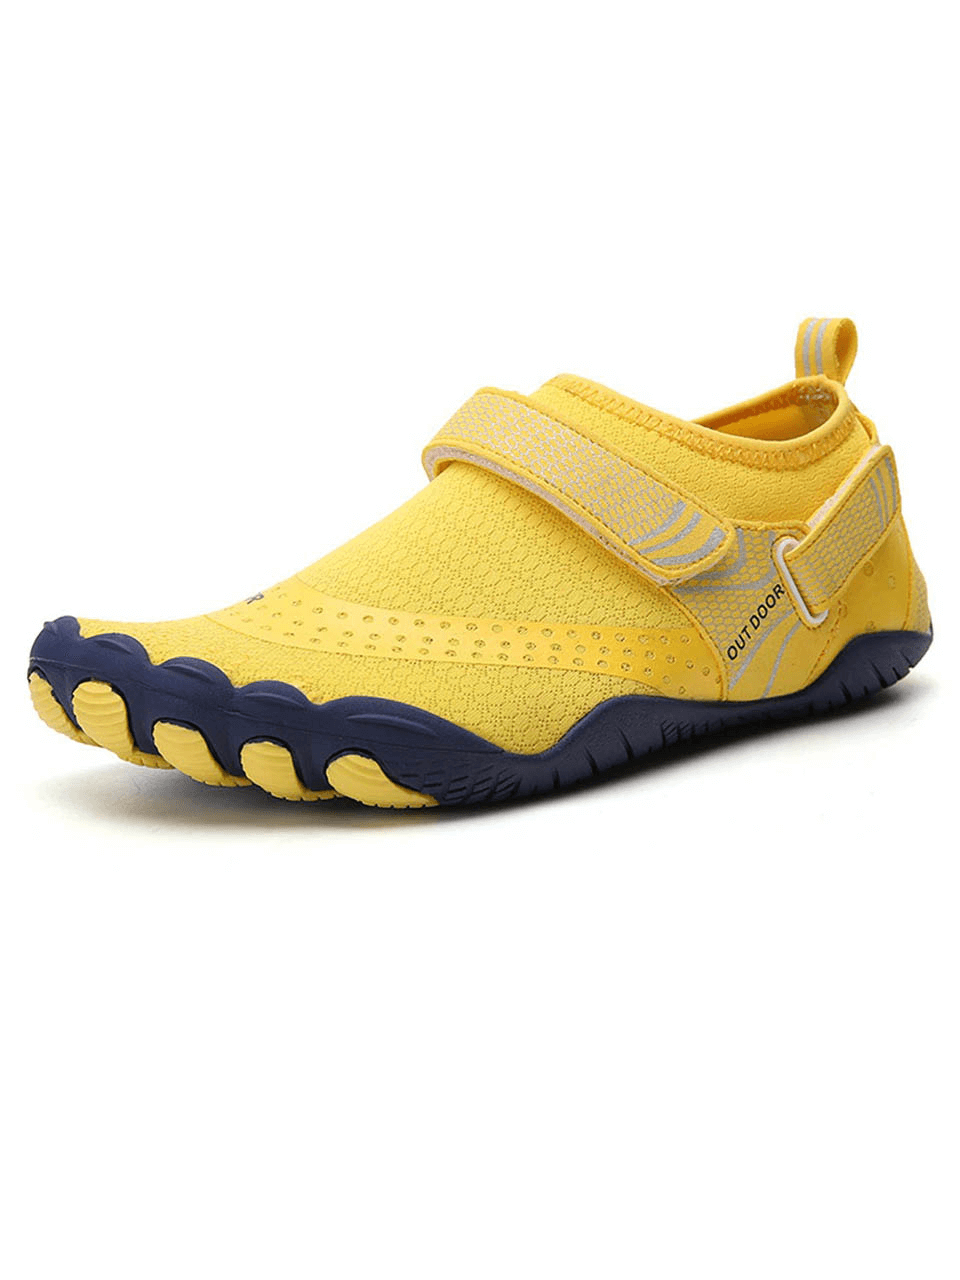 Unisex Breathable Nonslip Aquatic Sneaker / Soft Swimming Shoes - SF0356